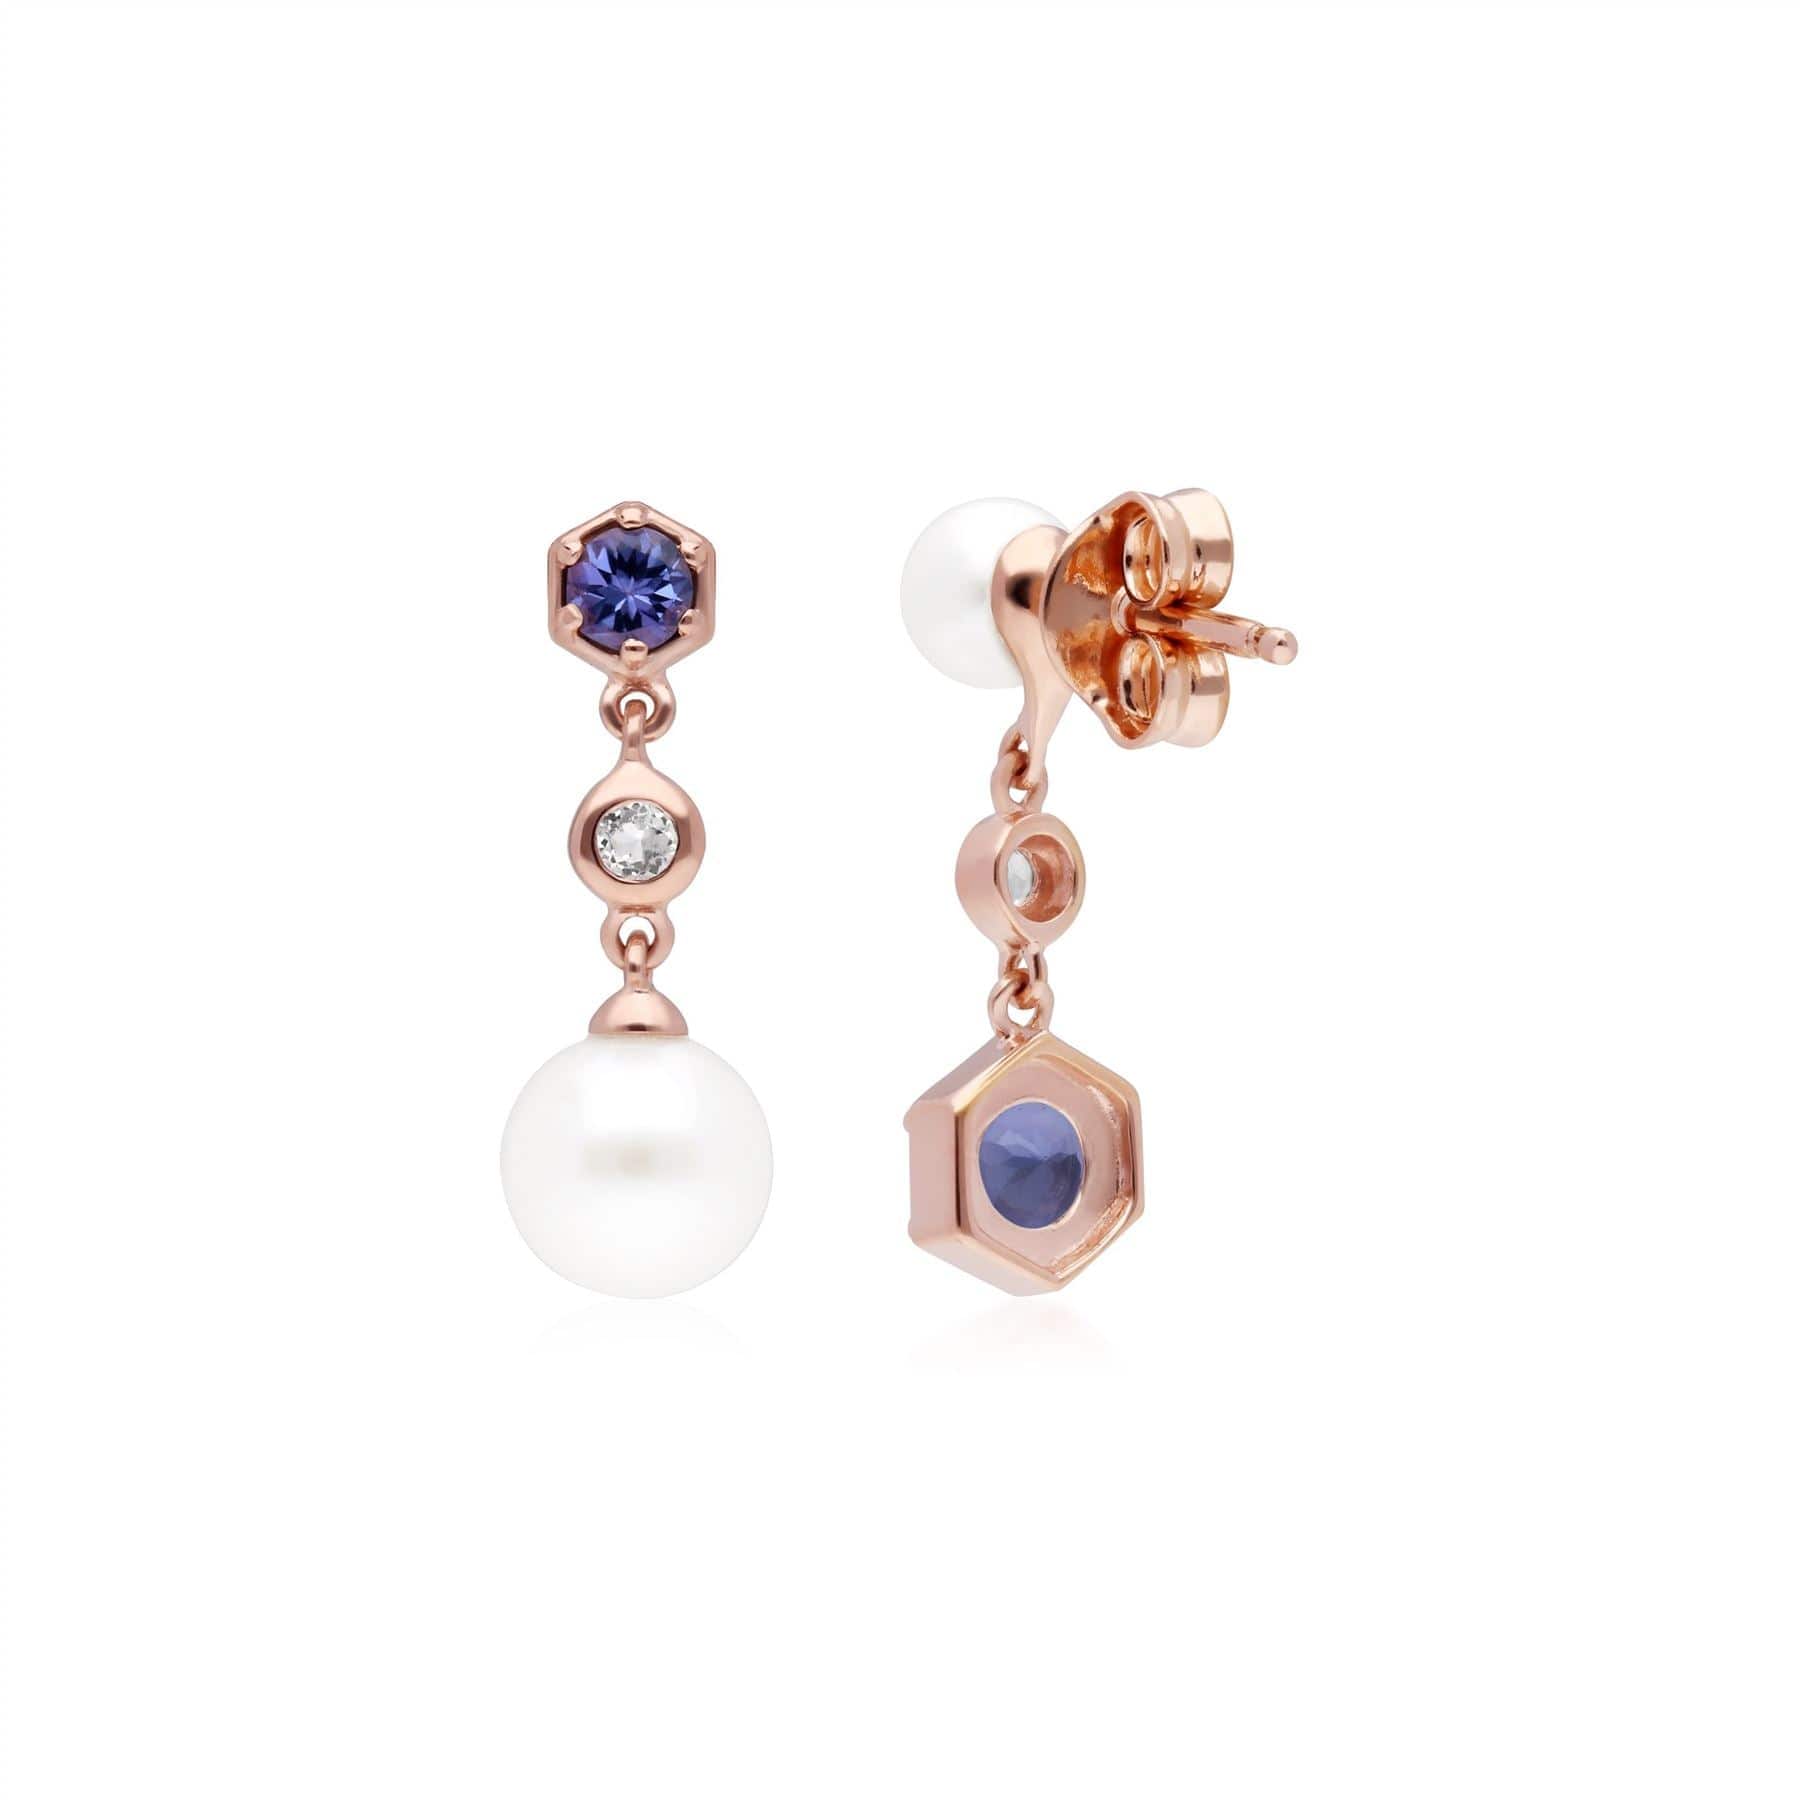 Modern Pearl, Tanzanite & Topaz Mismatched Drop Earrings in Rose Gold Plated Silver 1